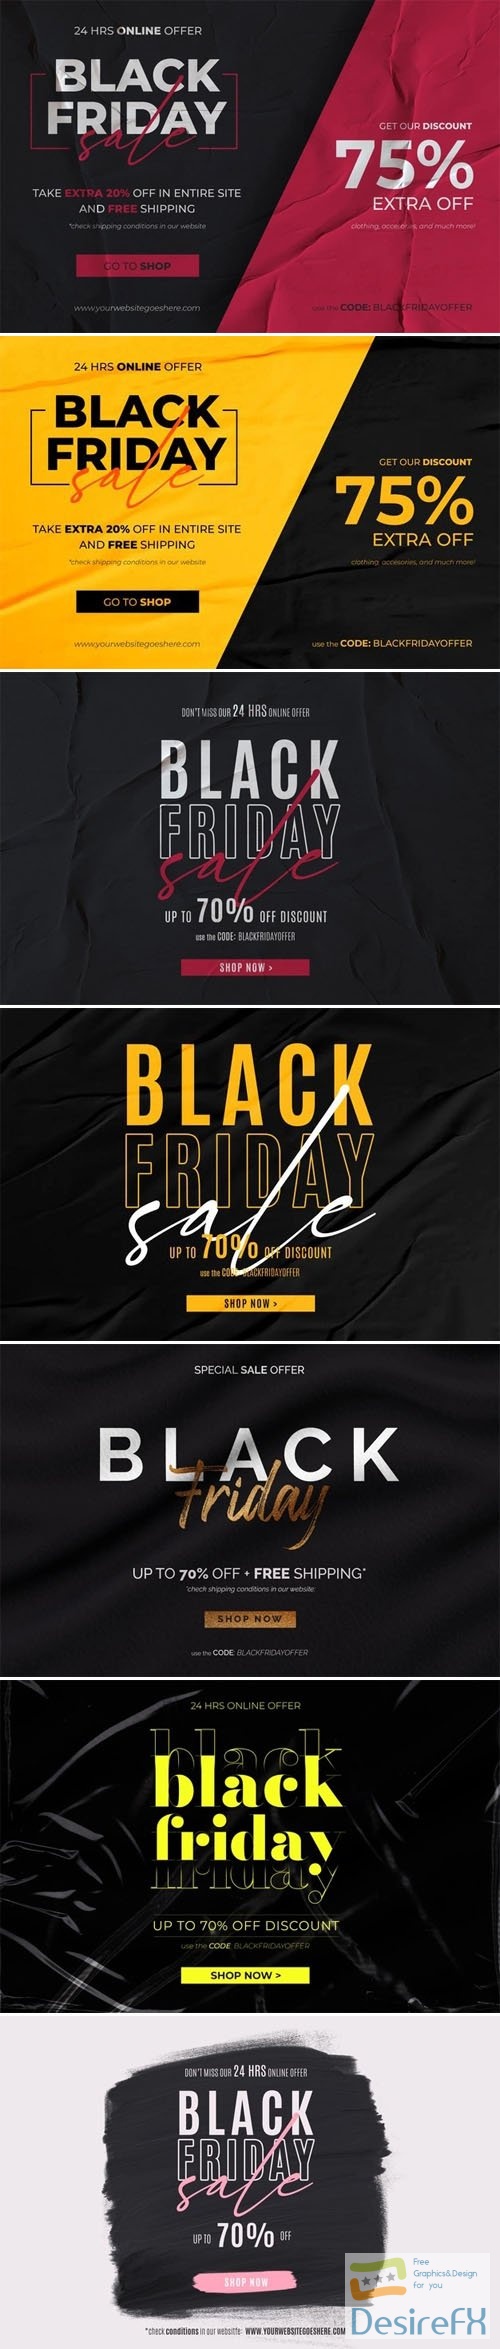 Black Friday Sale Banners PSD Templates